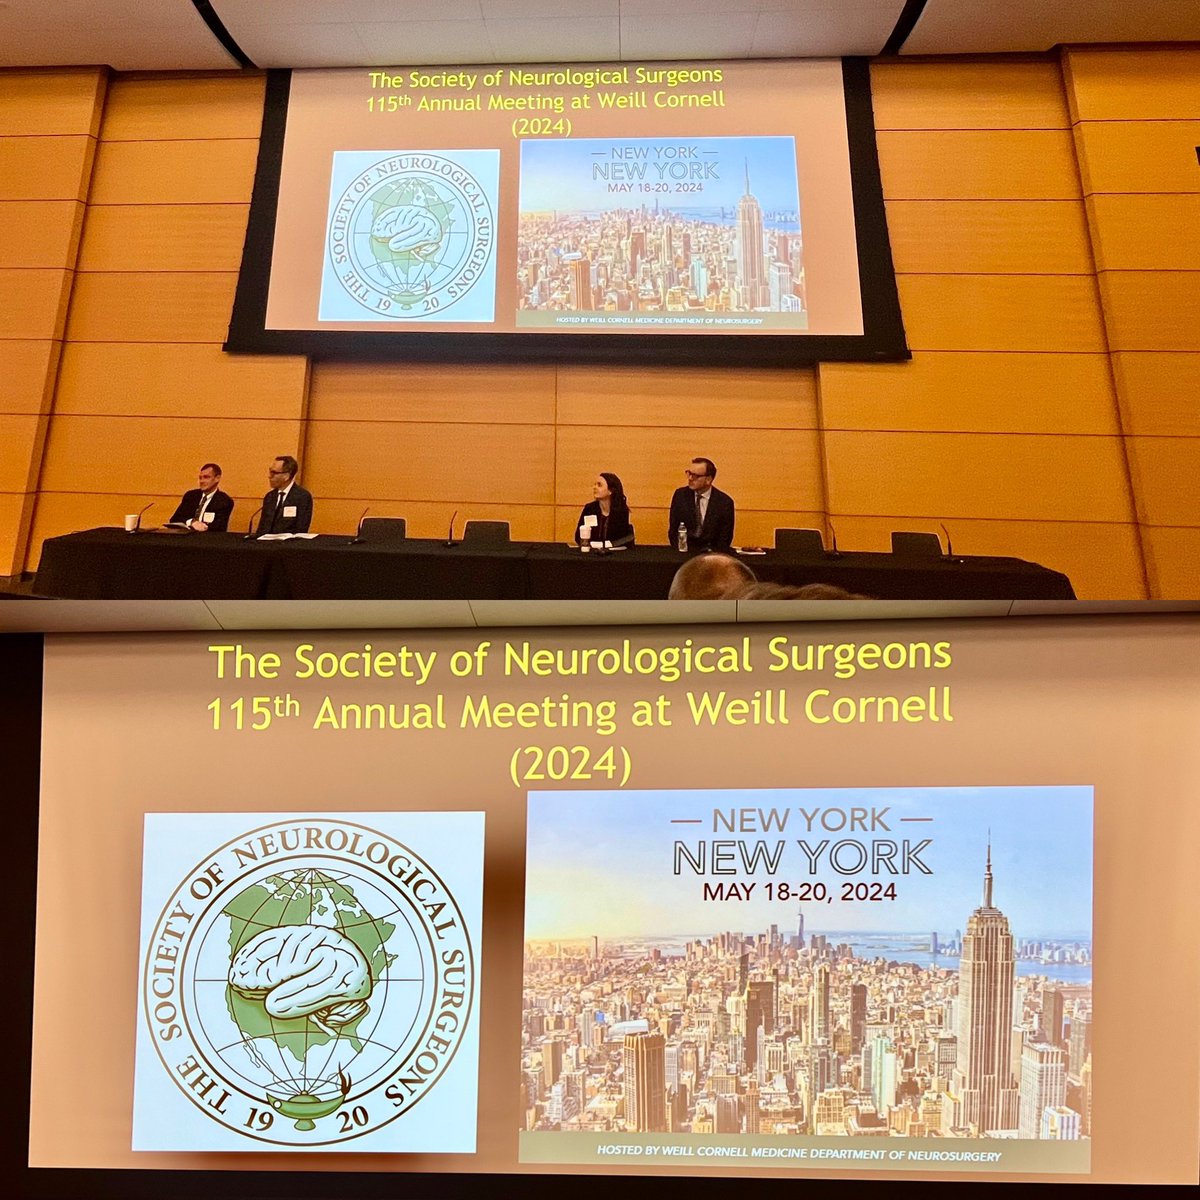 Excited to be at the @SNS_Neurosurg 115th annual meeting hosted by @WCMNeurosurgery @WeillCornell @MSKCancerCenter. The 'Senior Society' meeting focuses on excellence in #Neurosurgery education, research & leadership. @NeurosurgeryUSC @USCBTC @AANSNeuro @TumorSection